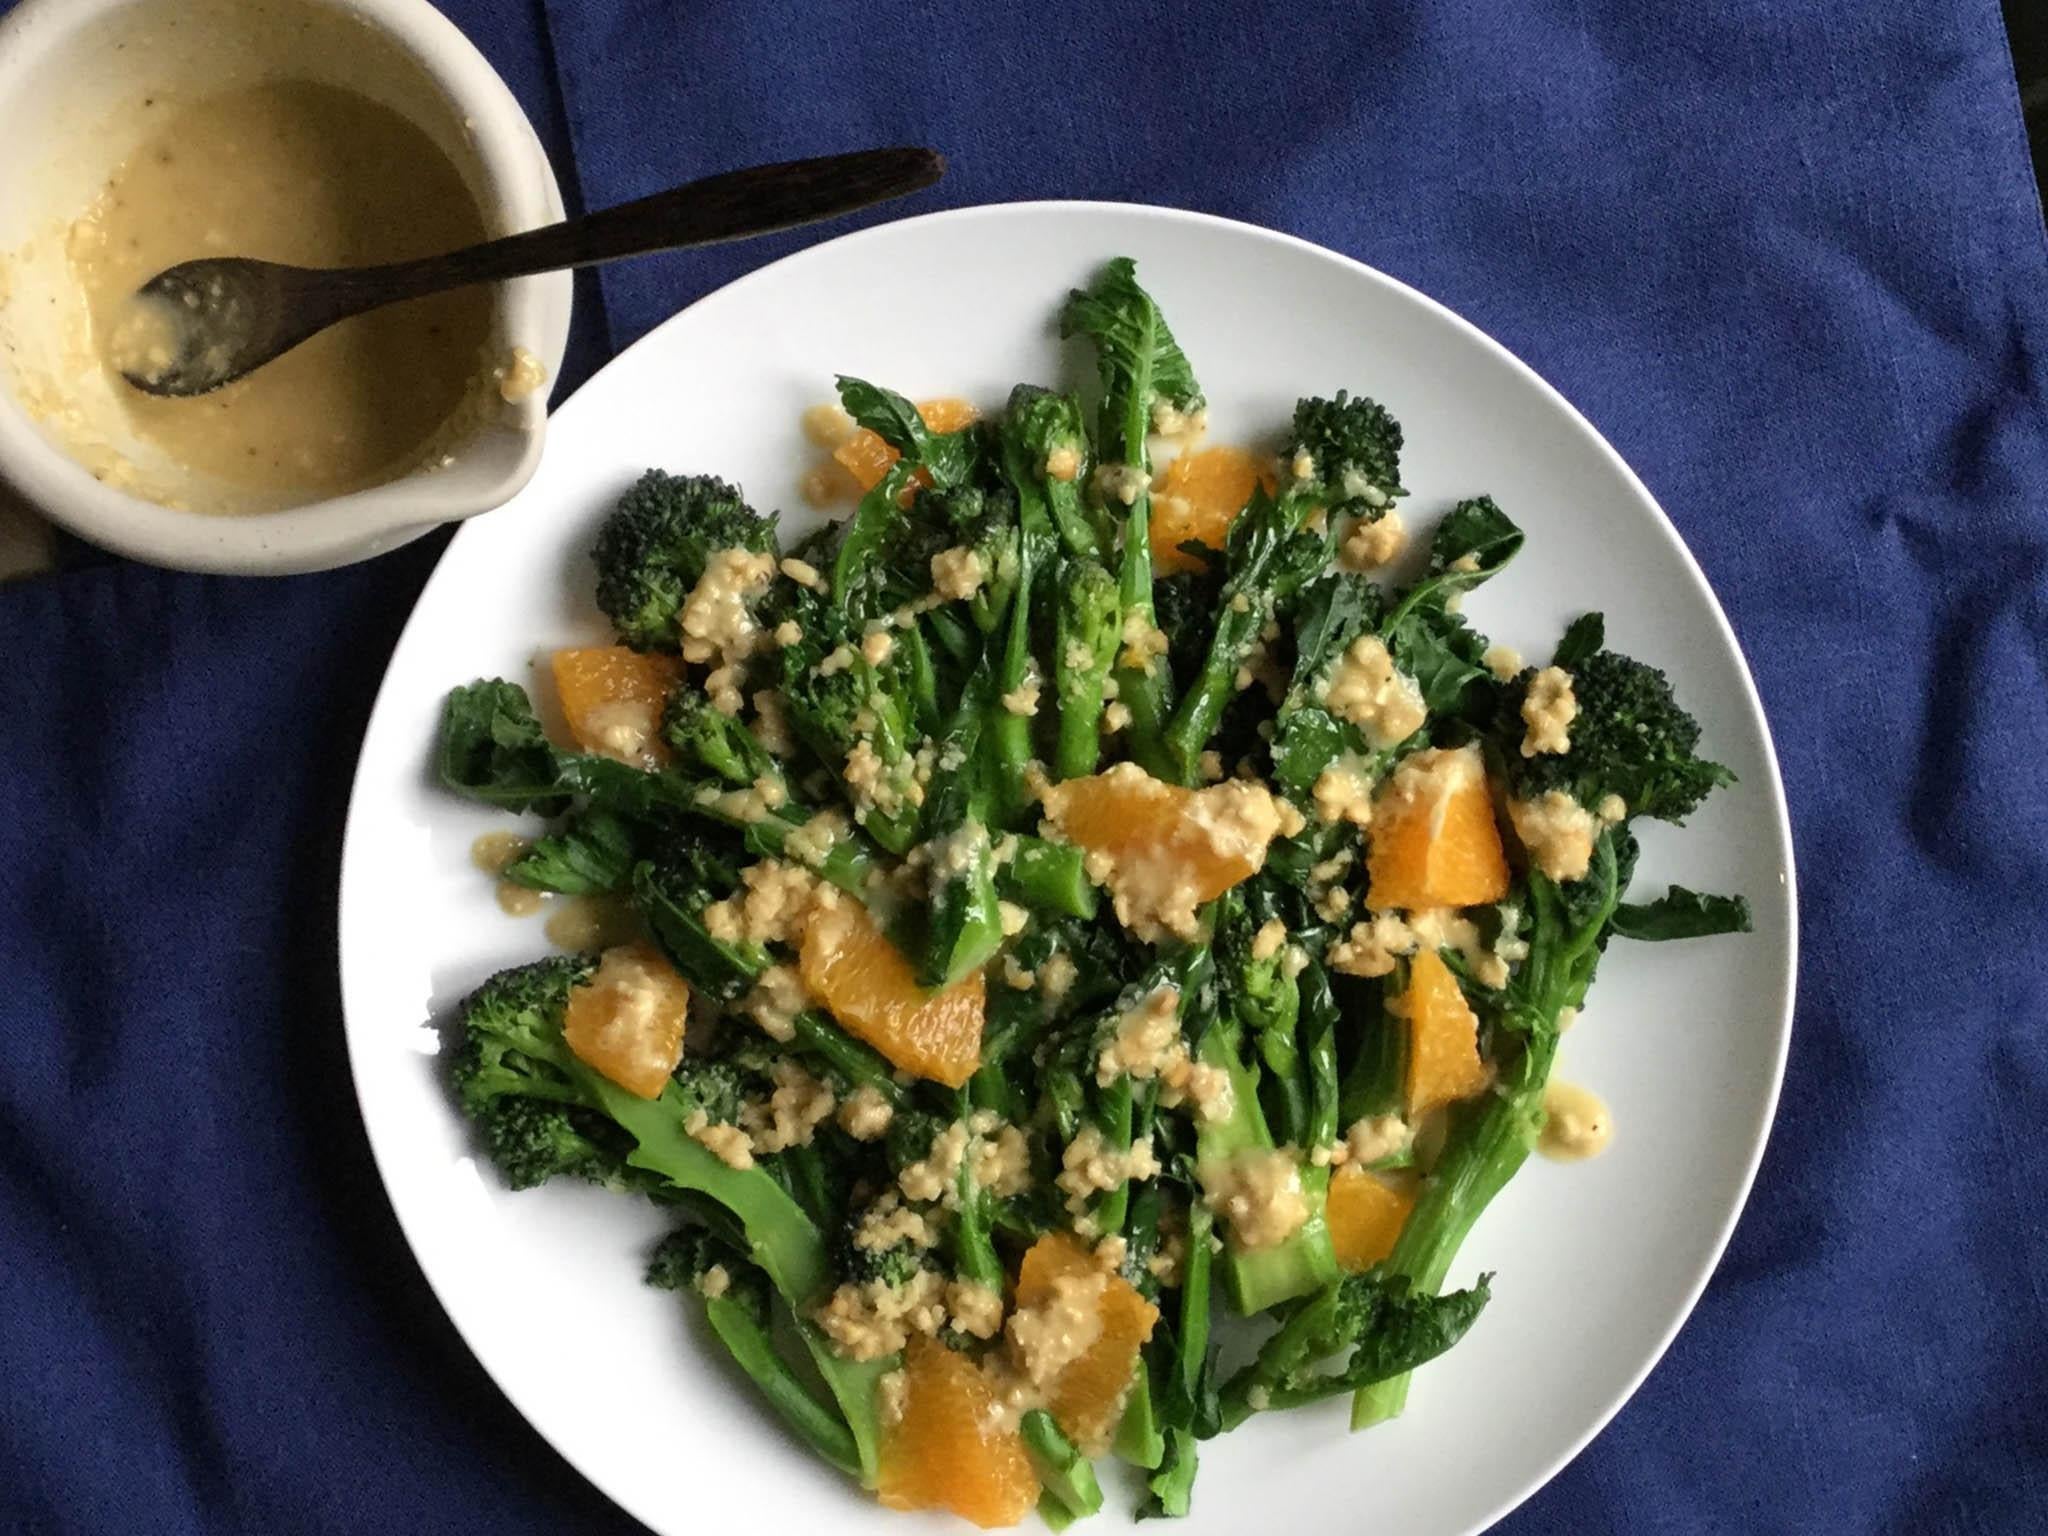 Vitamin kick: this dish of broccoli, orange and cashews is packed with healthy nutrients